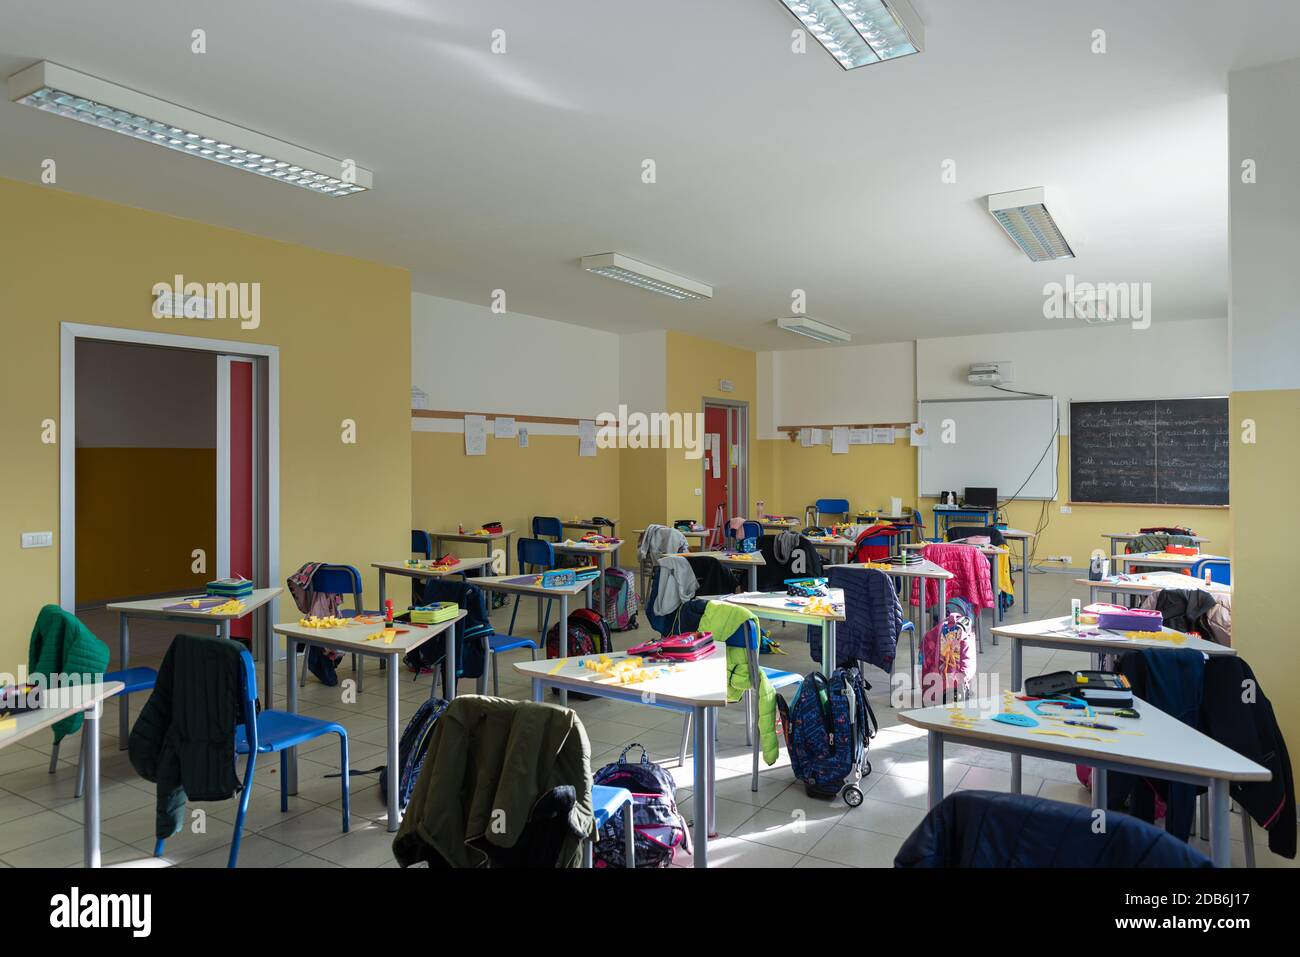 View of a classroom with desks and chairs, interior of a school Stock Photo